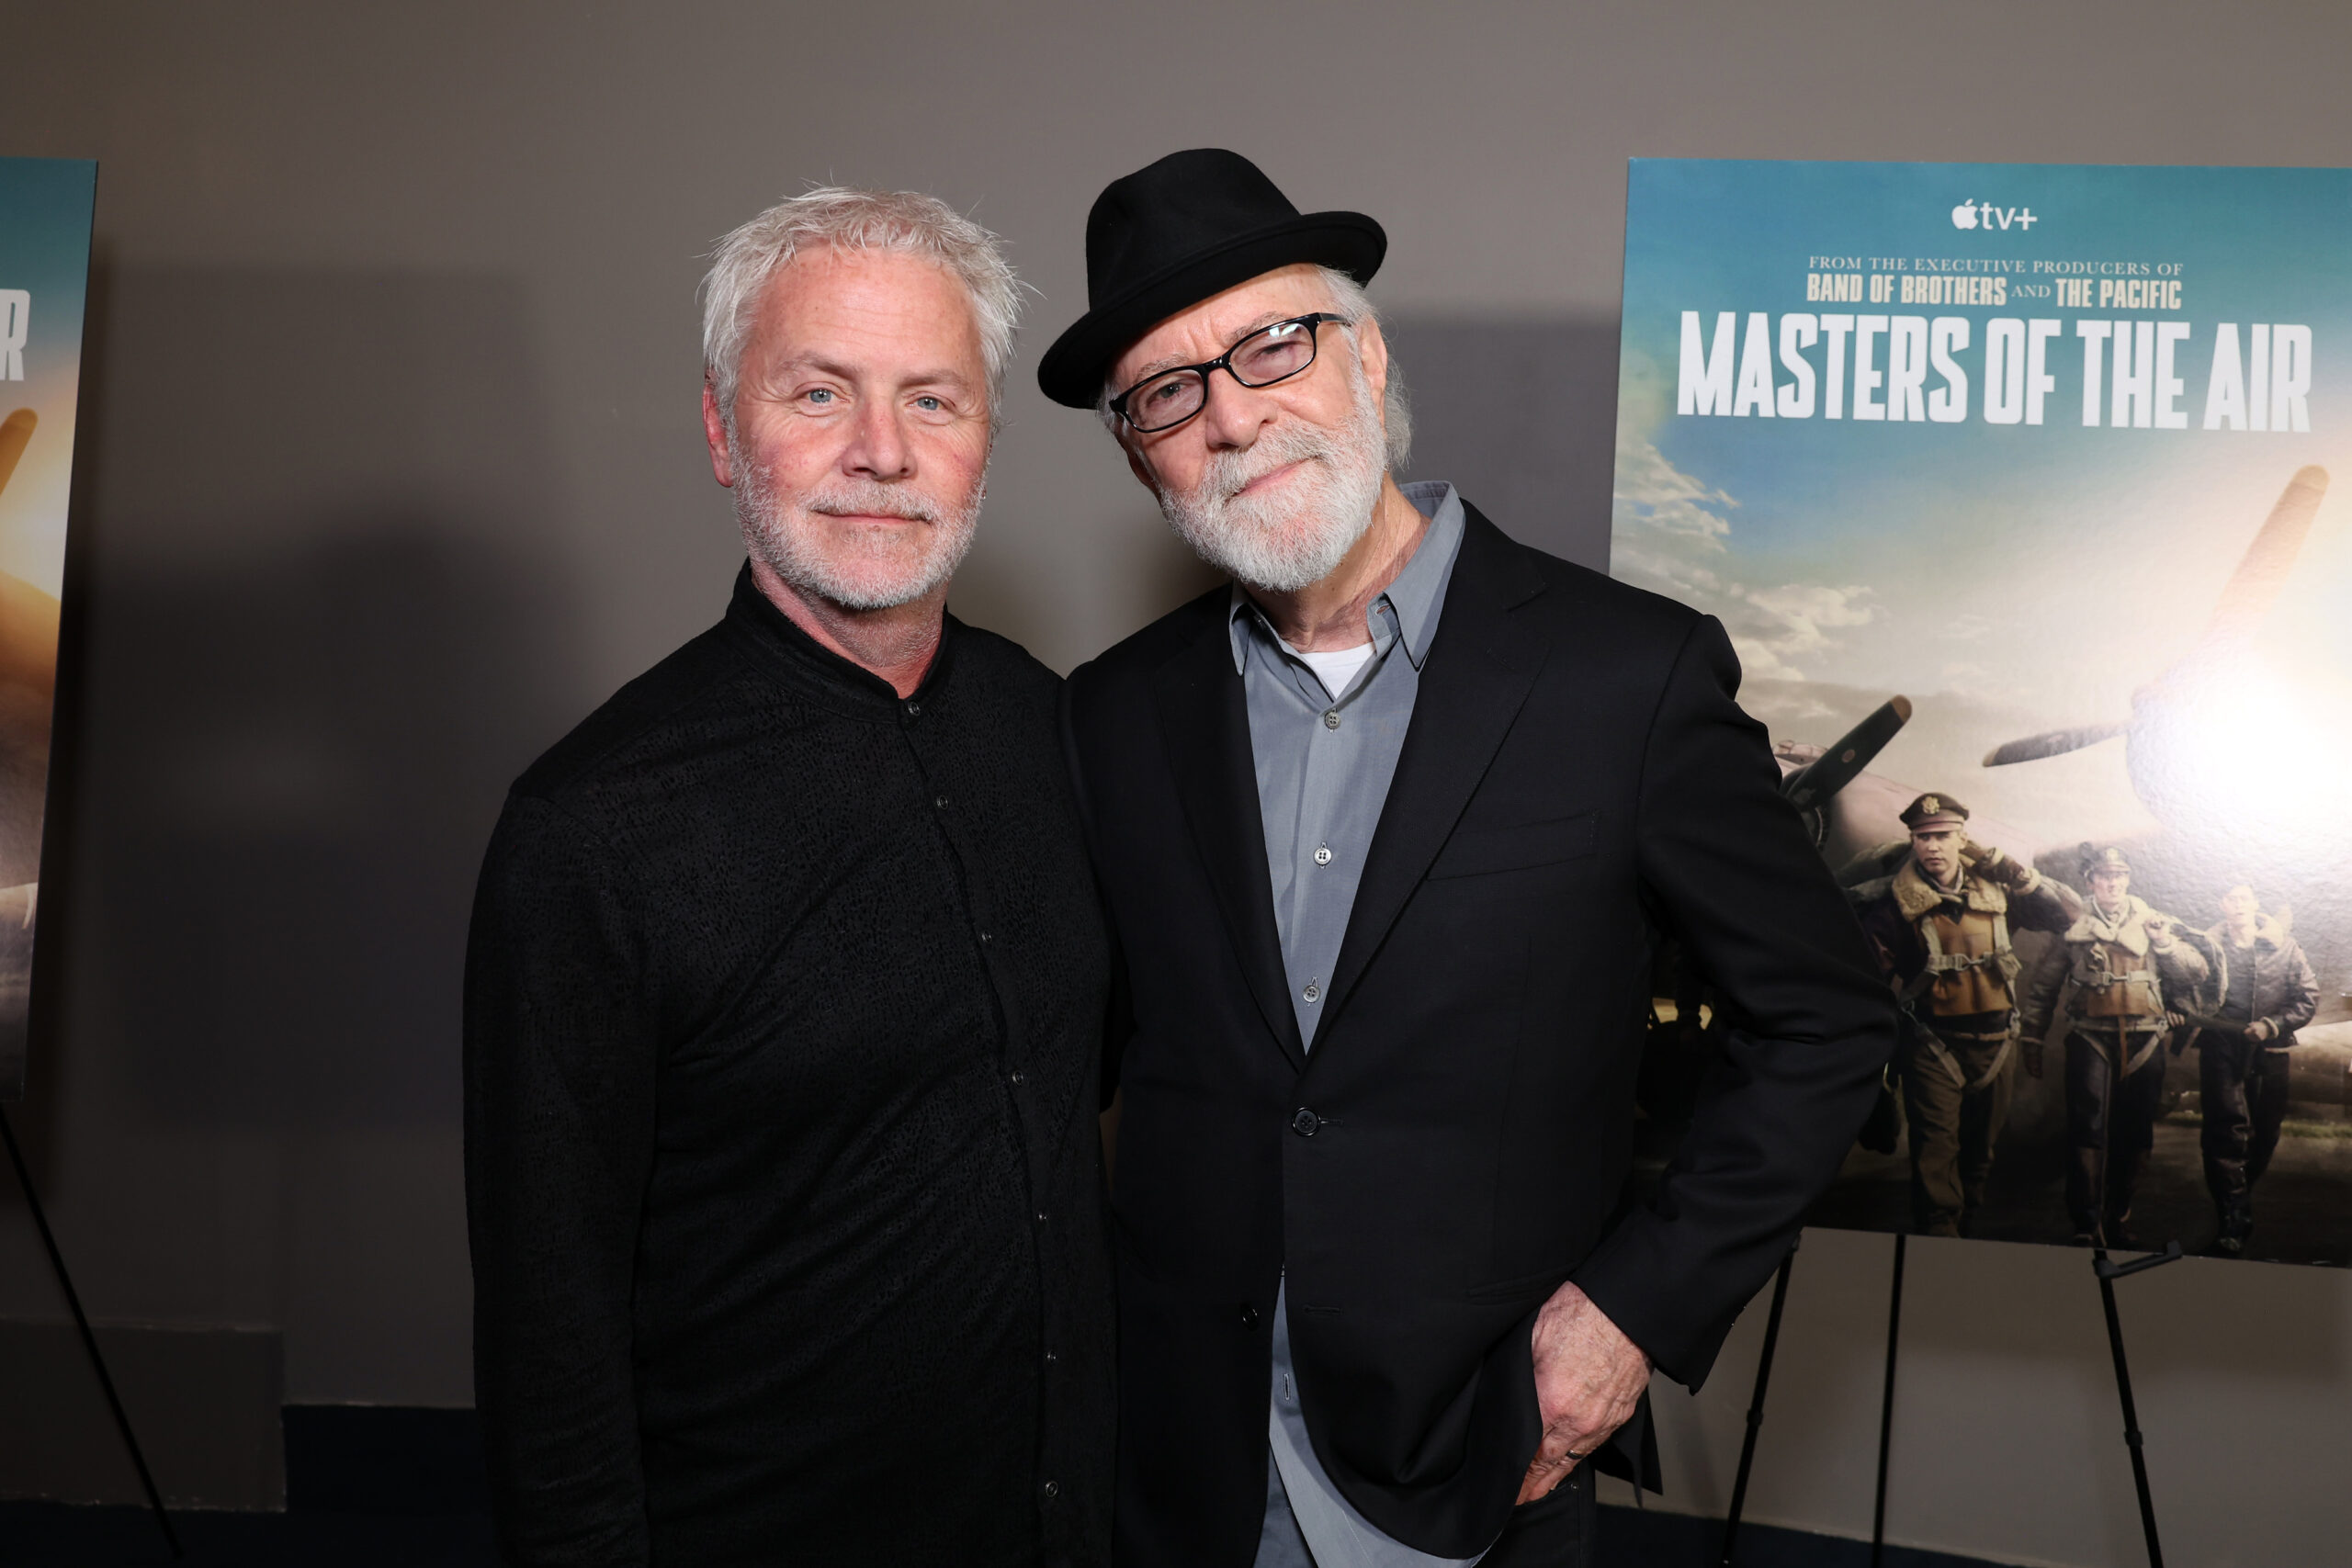 Blake Neely on Composing the Score for Masters of the Air